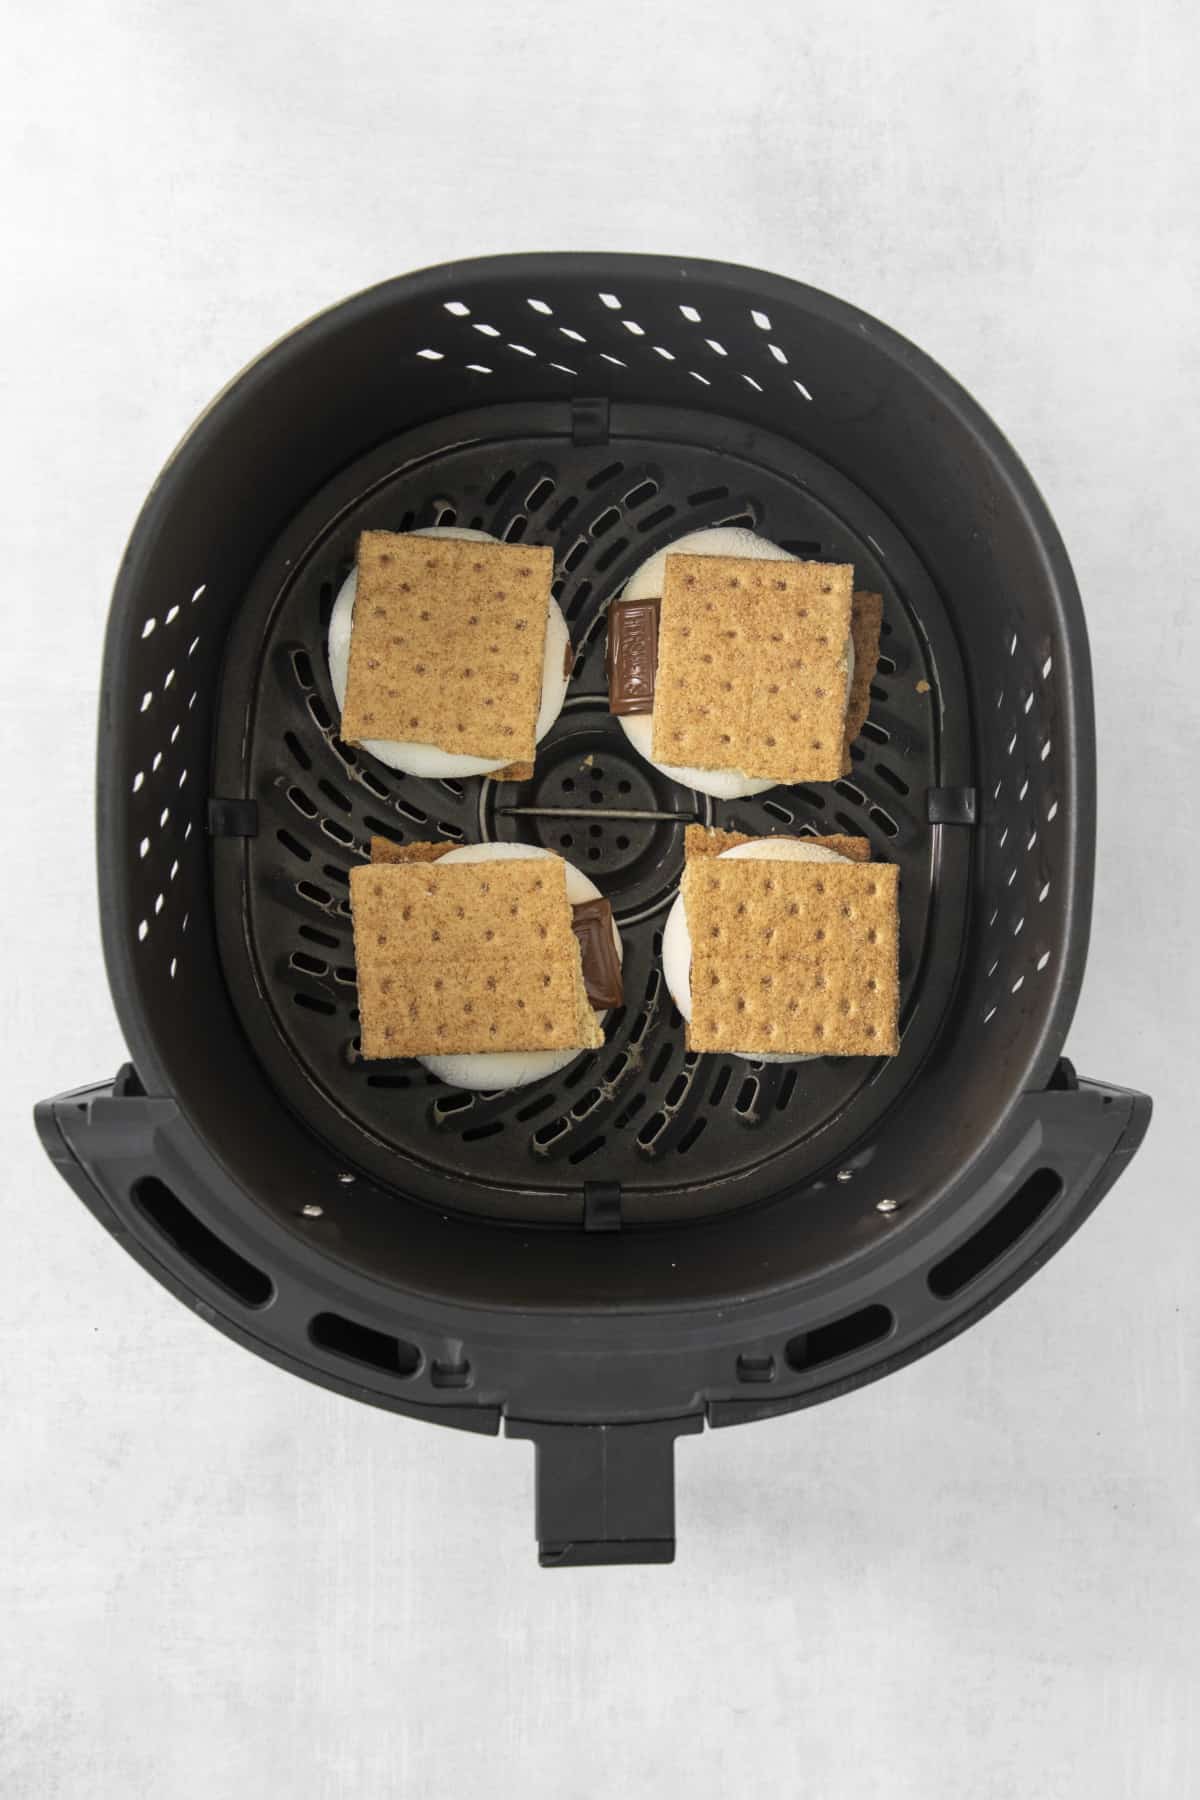 four s'mores in the air fryer.